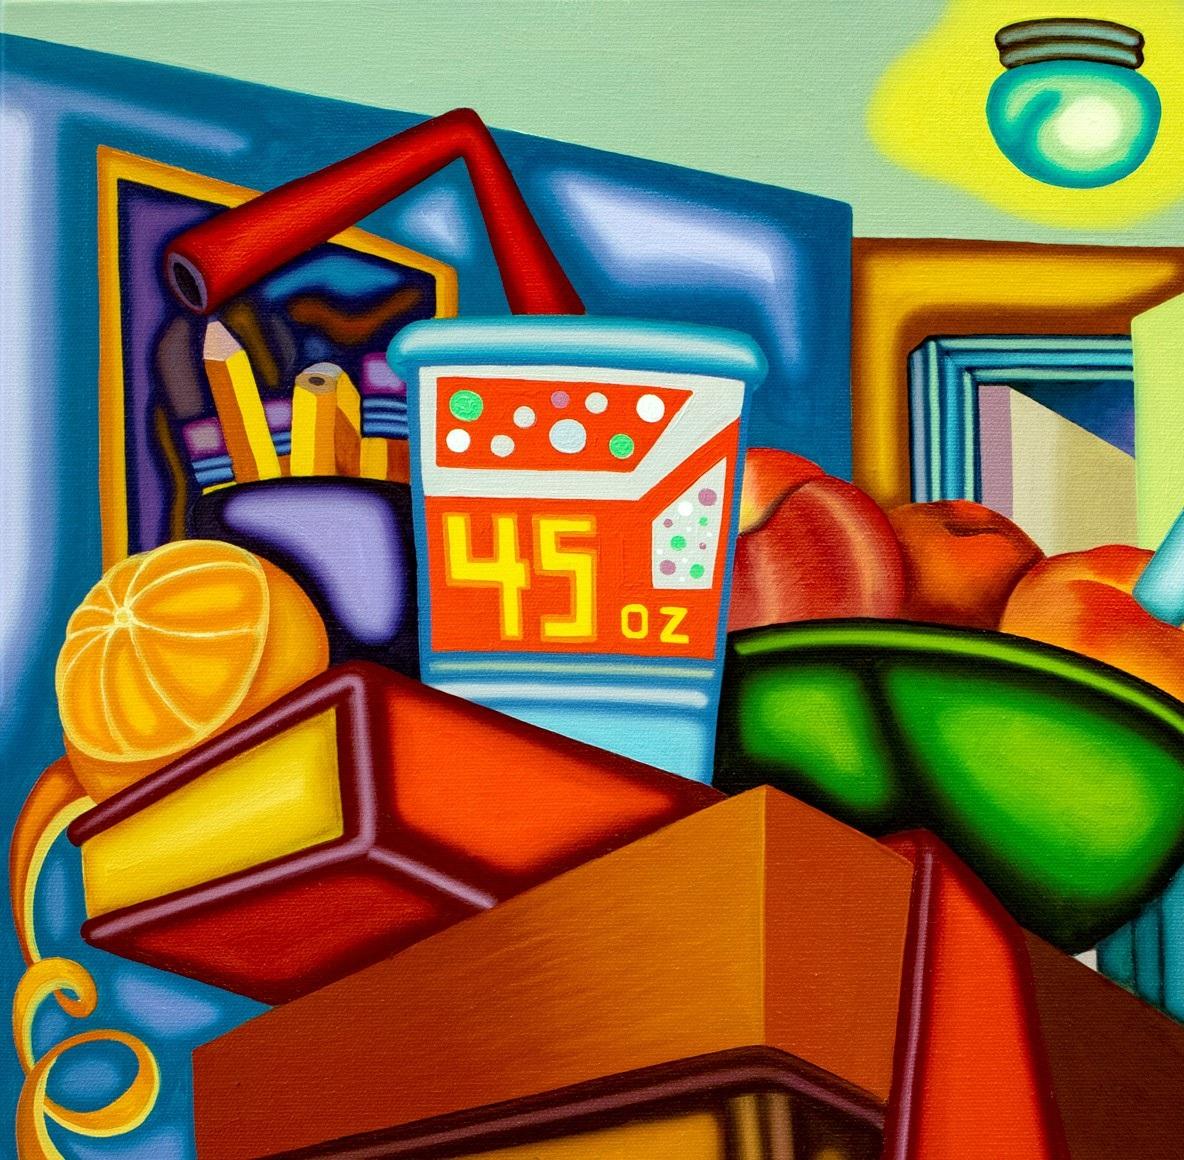 AS ABOVE SO BELOW - Cubist, Surreal Still Life with Bold Colors - Painting by Jason Stout